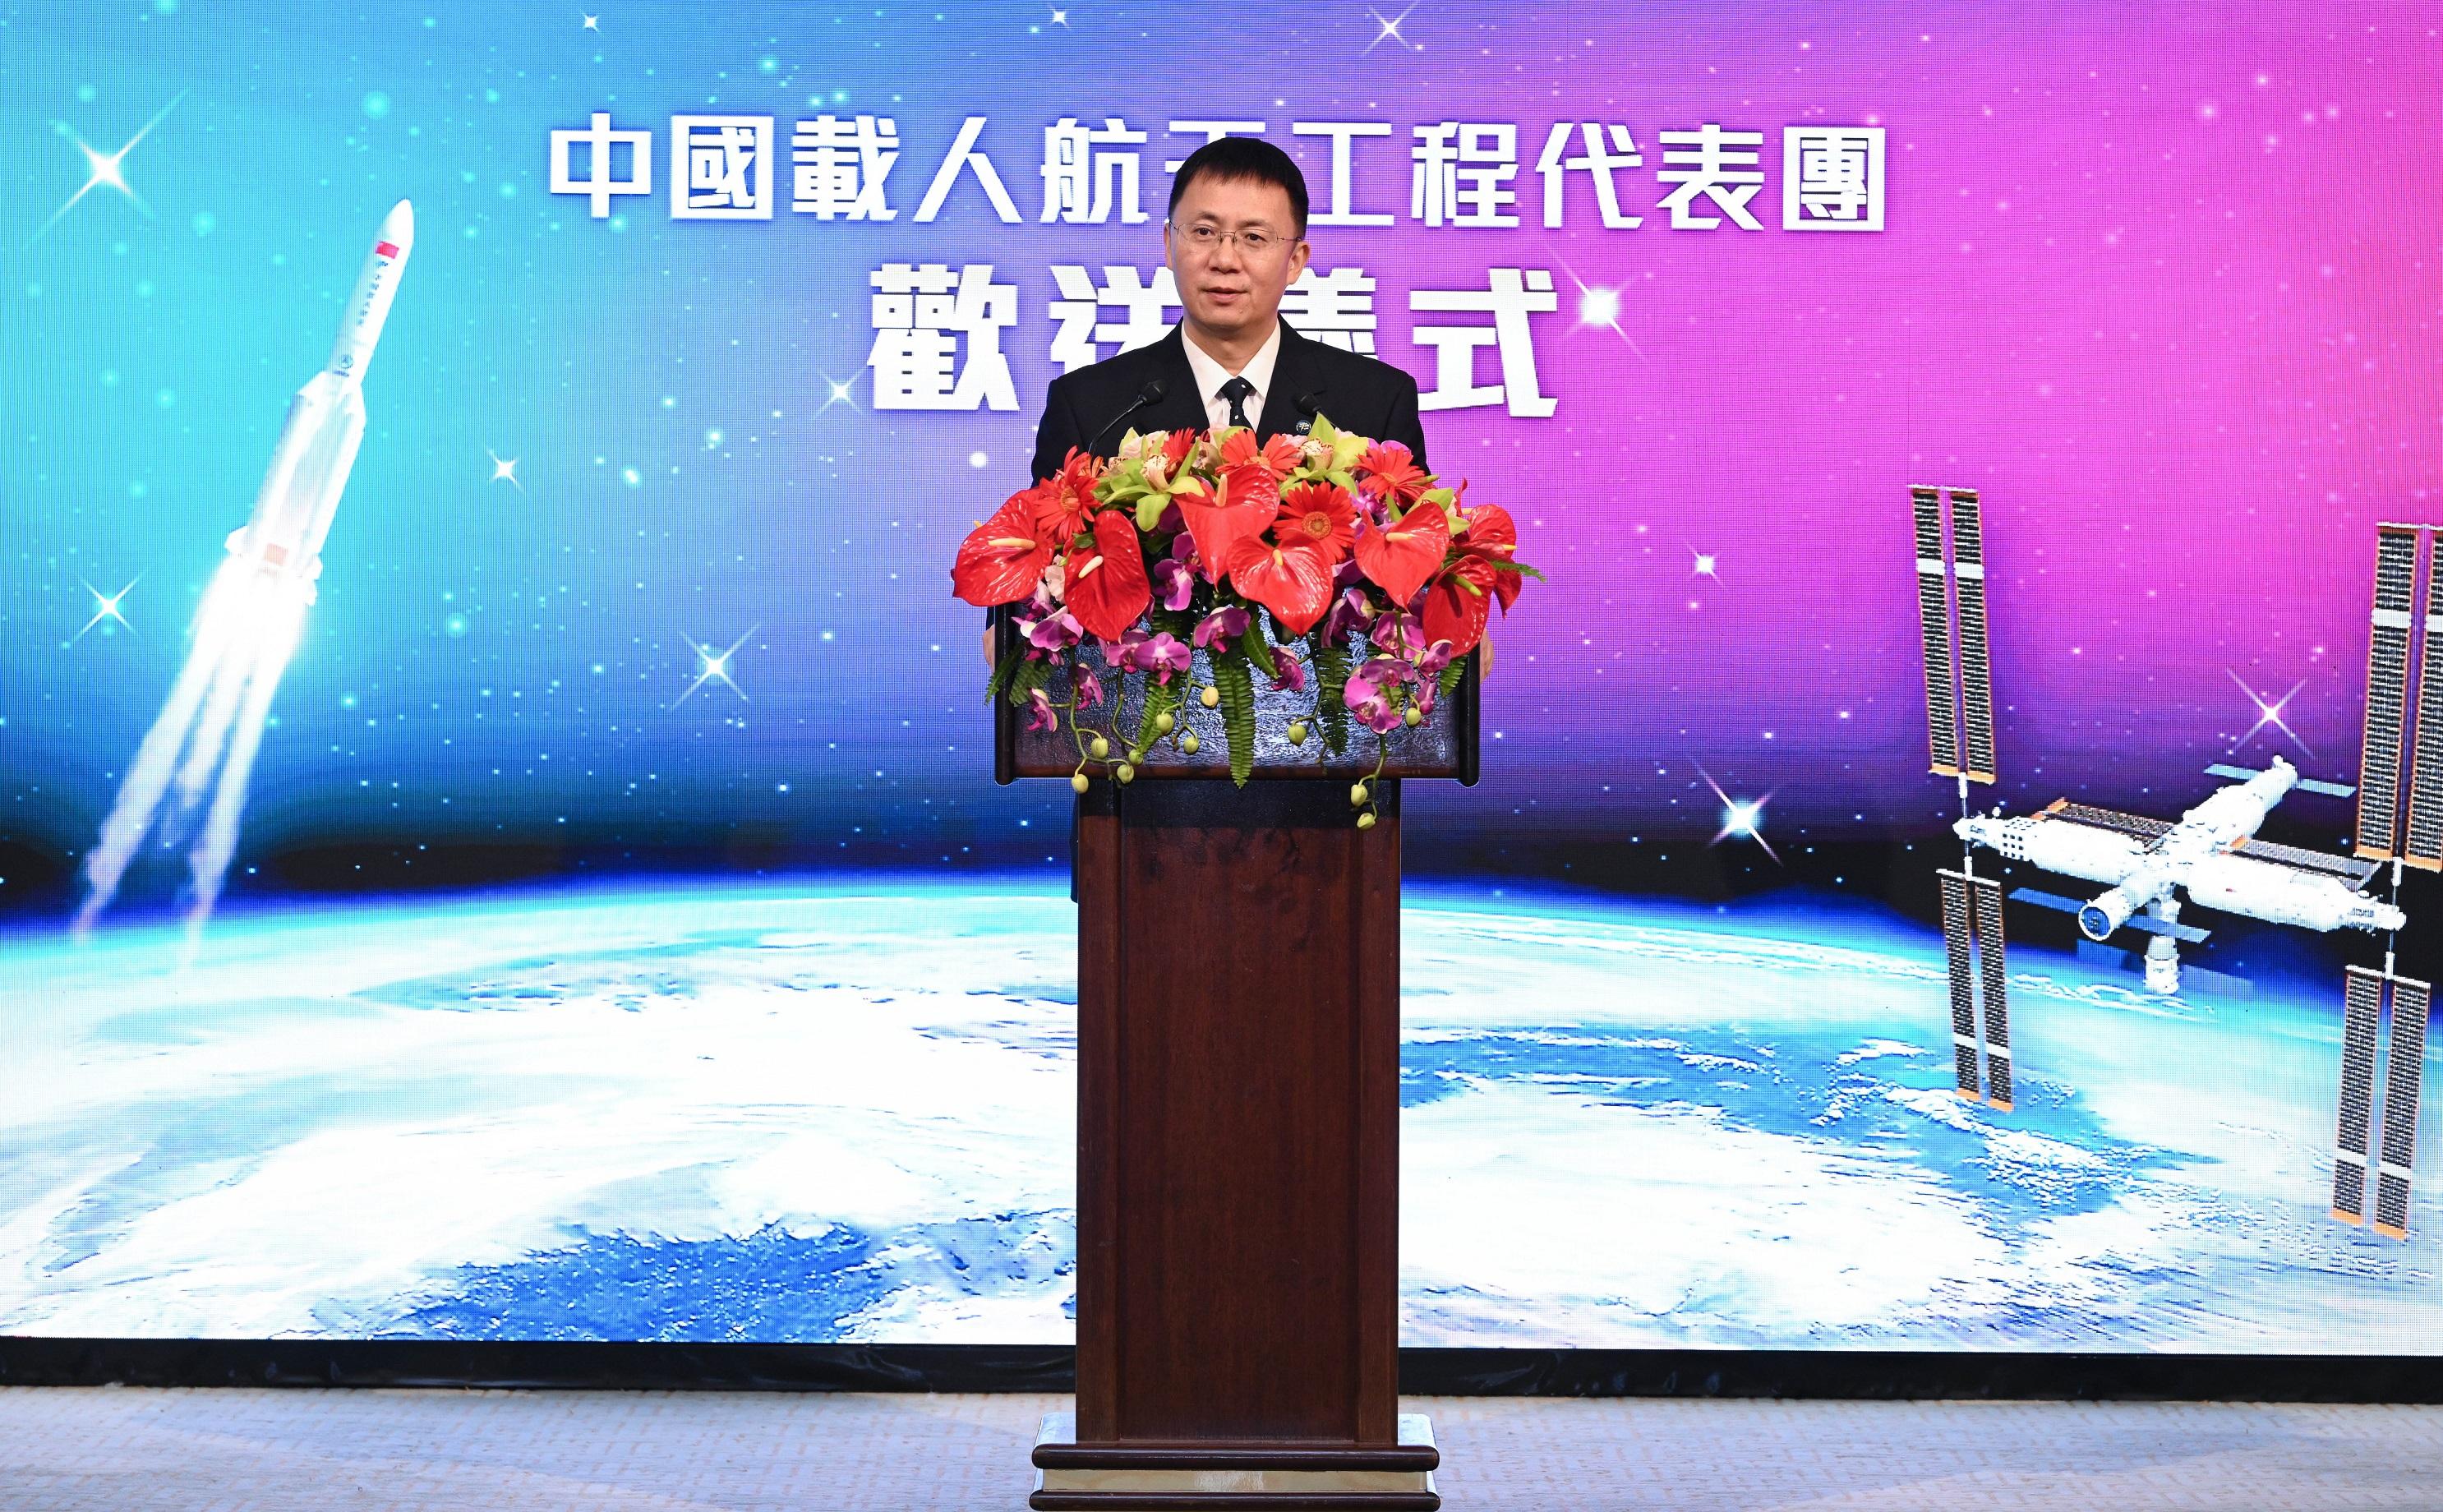 The China Manned Space delegation conducted their last day of visit to Hong Kong today (December 1). Photo shows the leader of the delegation and Deputy Director General of the China Manned Space Agency, Mr Lin Xiqiang, speaking at the farewell ceremony for the delegation. 